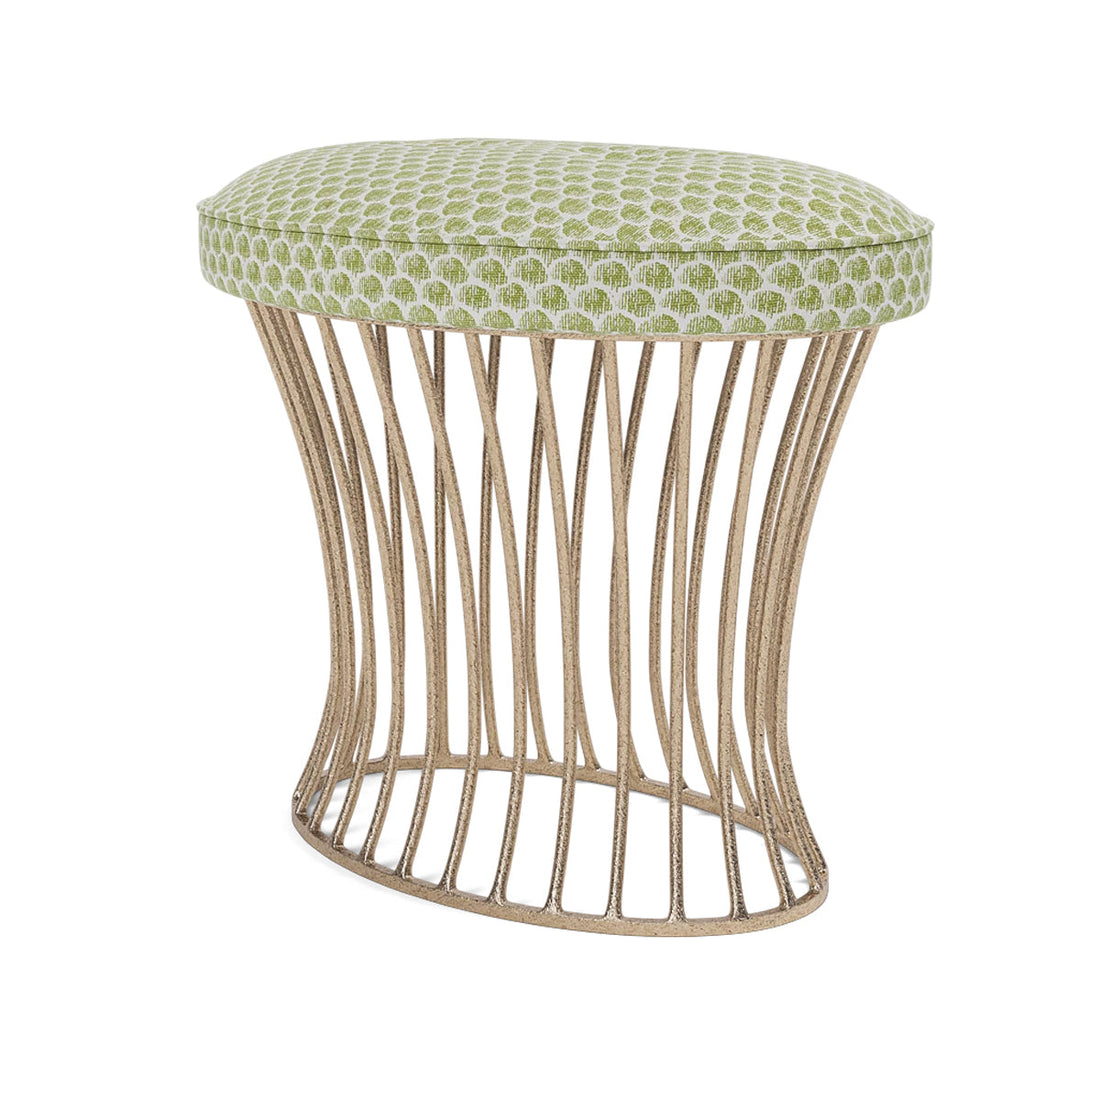 Made Goods Roderic Oval Stool in Humboldt Cotton Jute